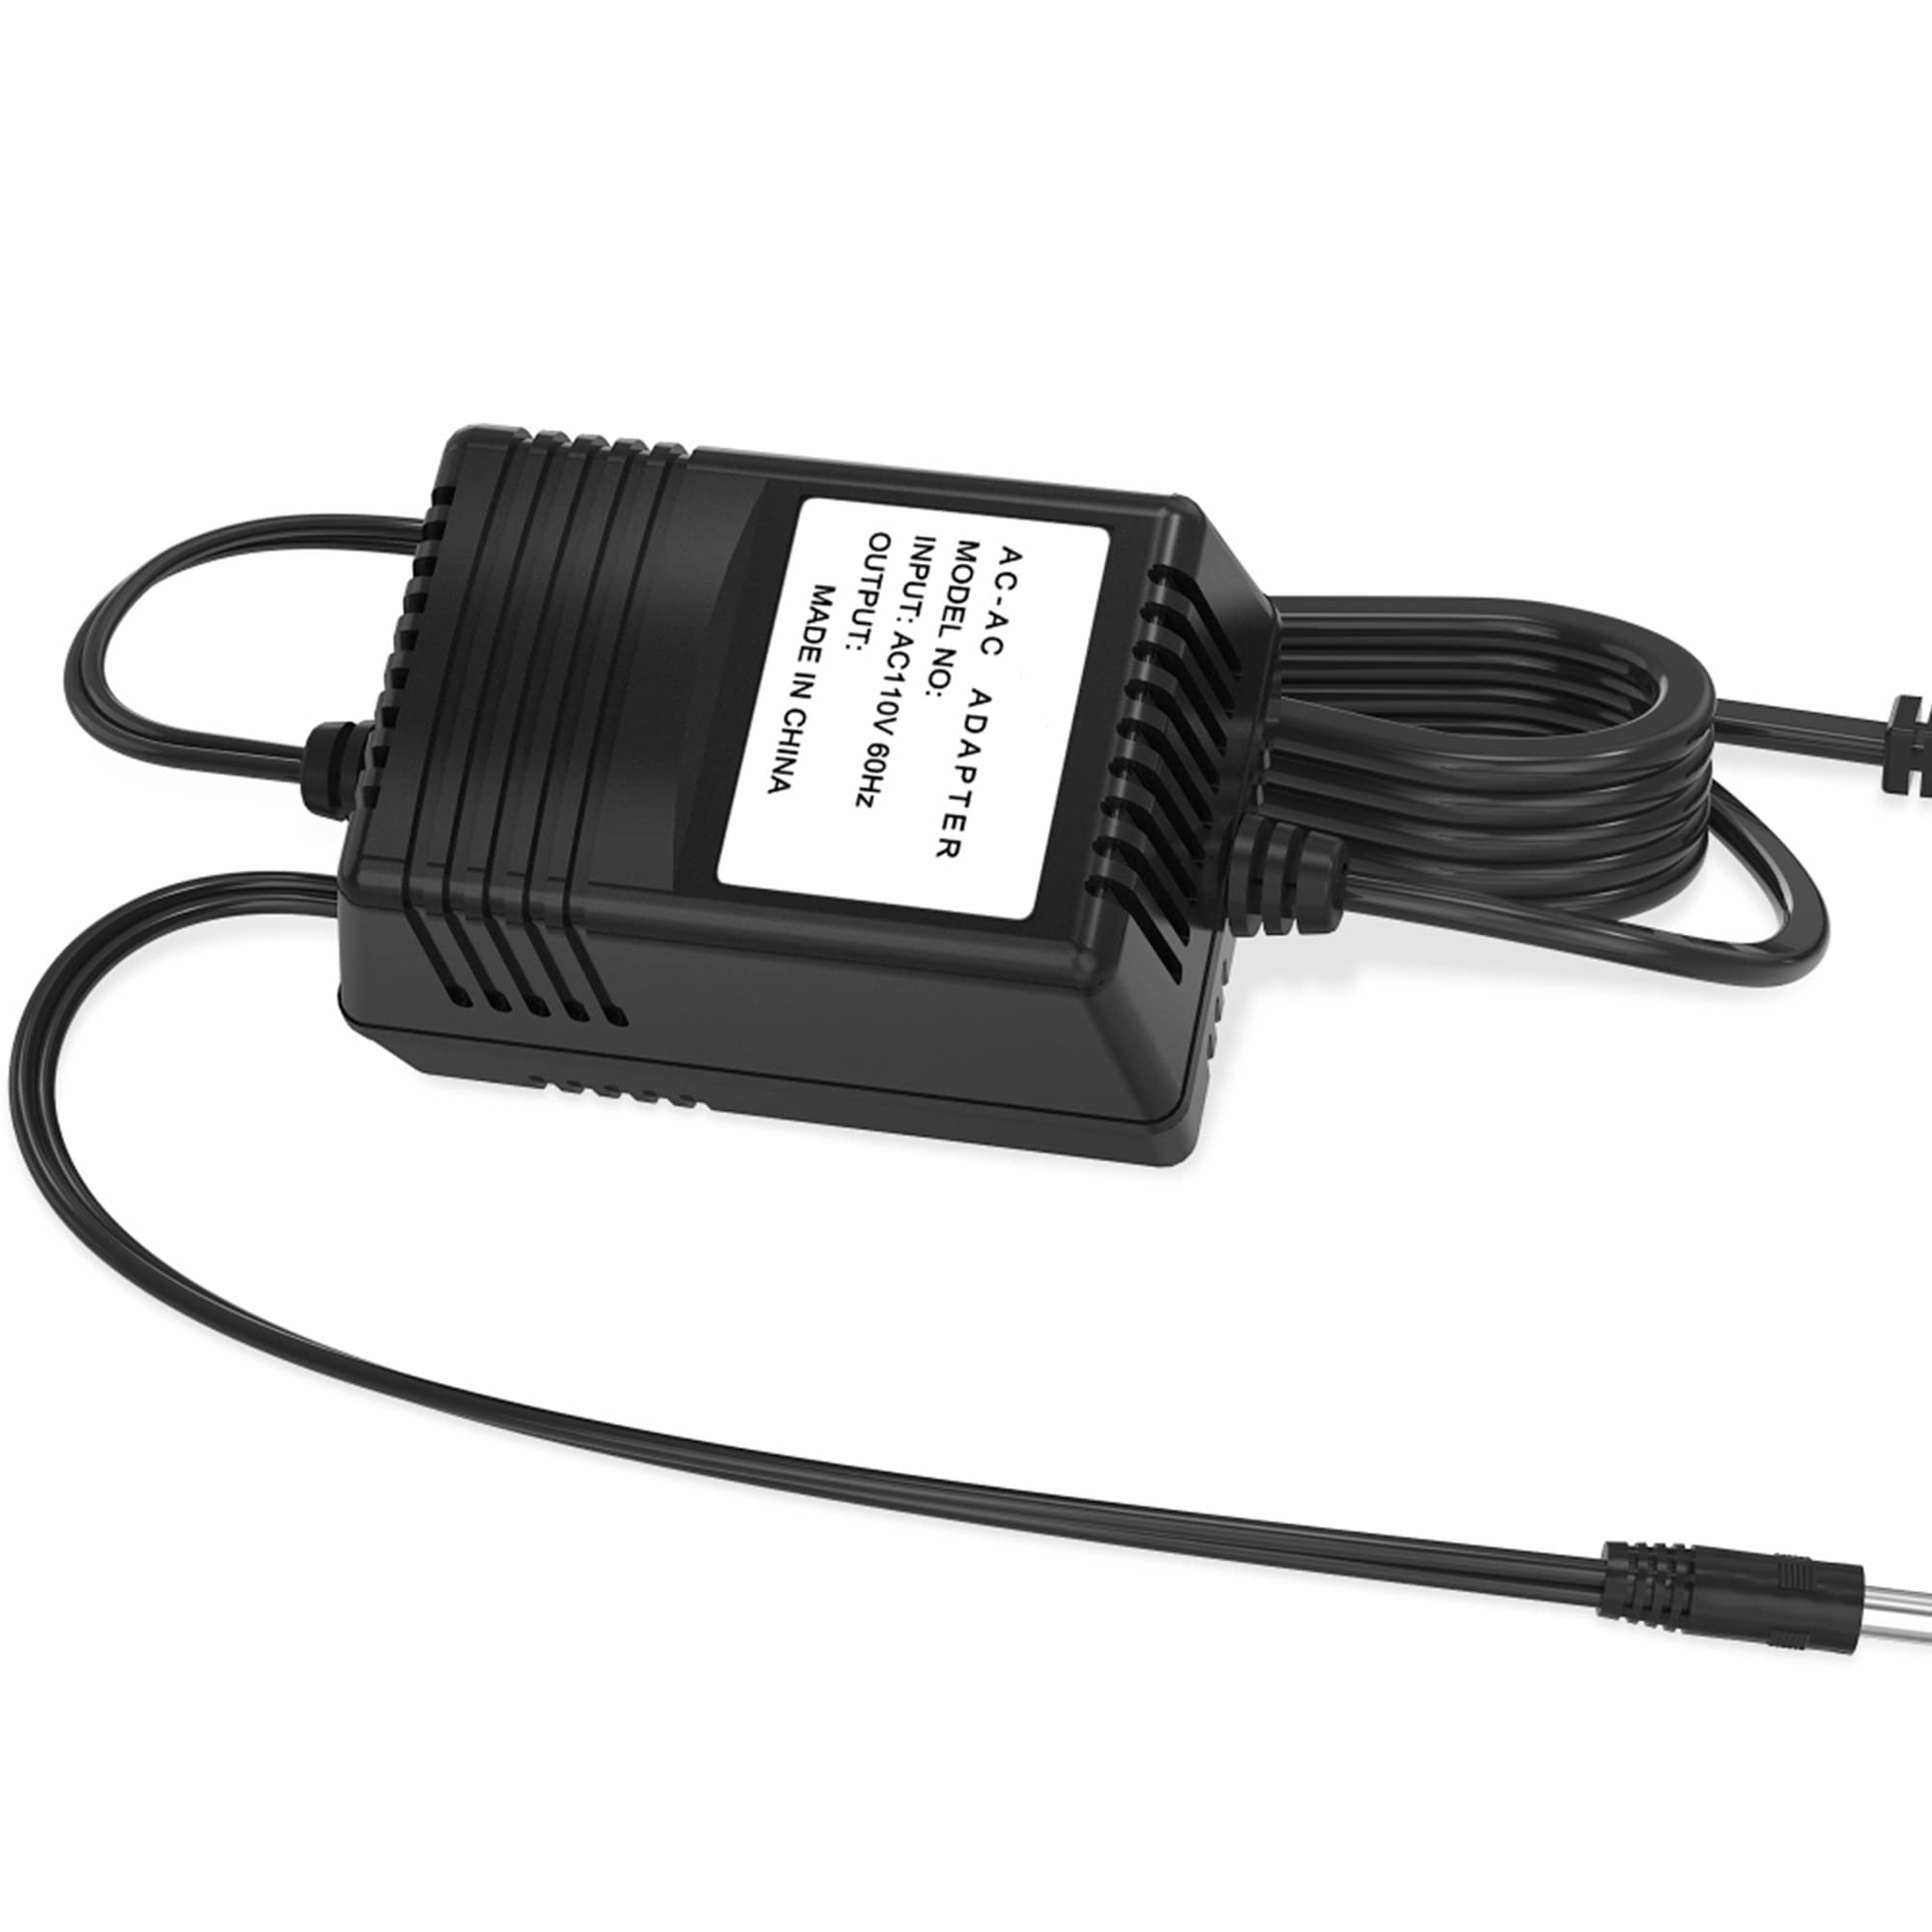 SLLEA AC-AC Adapter Replacement for PetSafe Radio Fence RF-1010 RF-1010M Pet Containment System